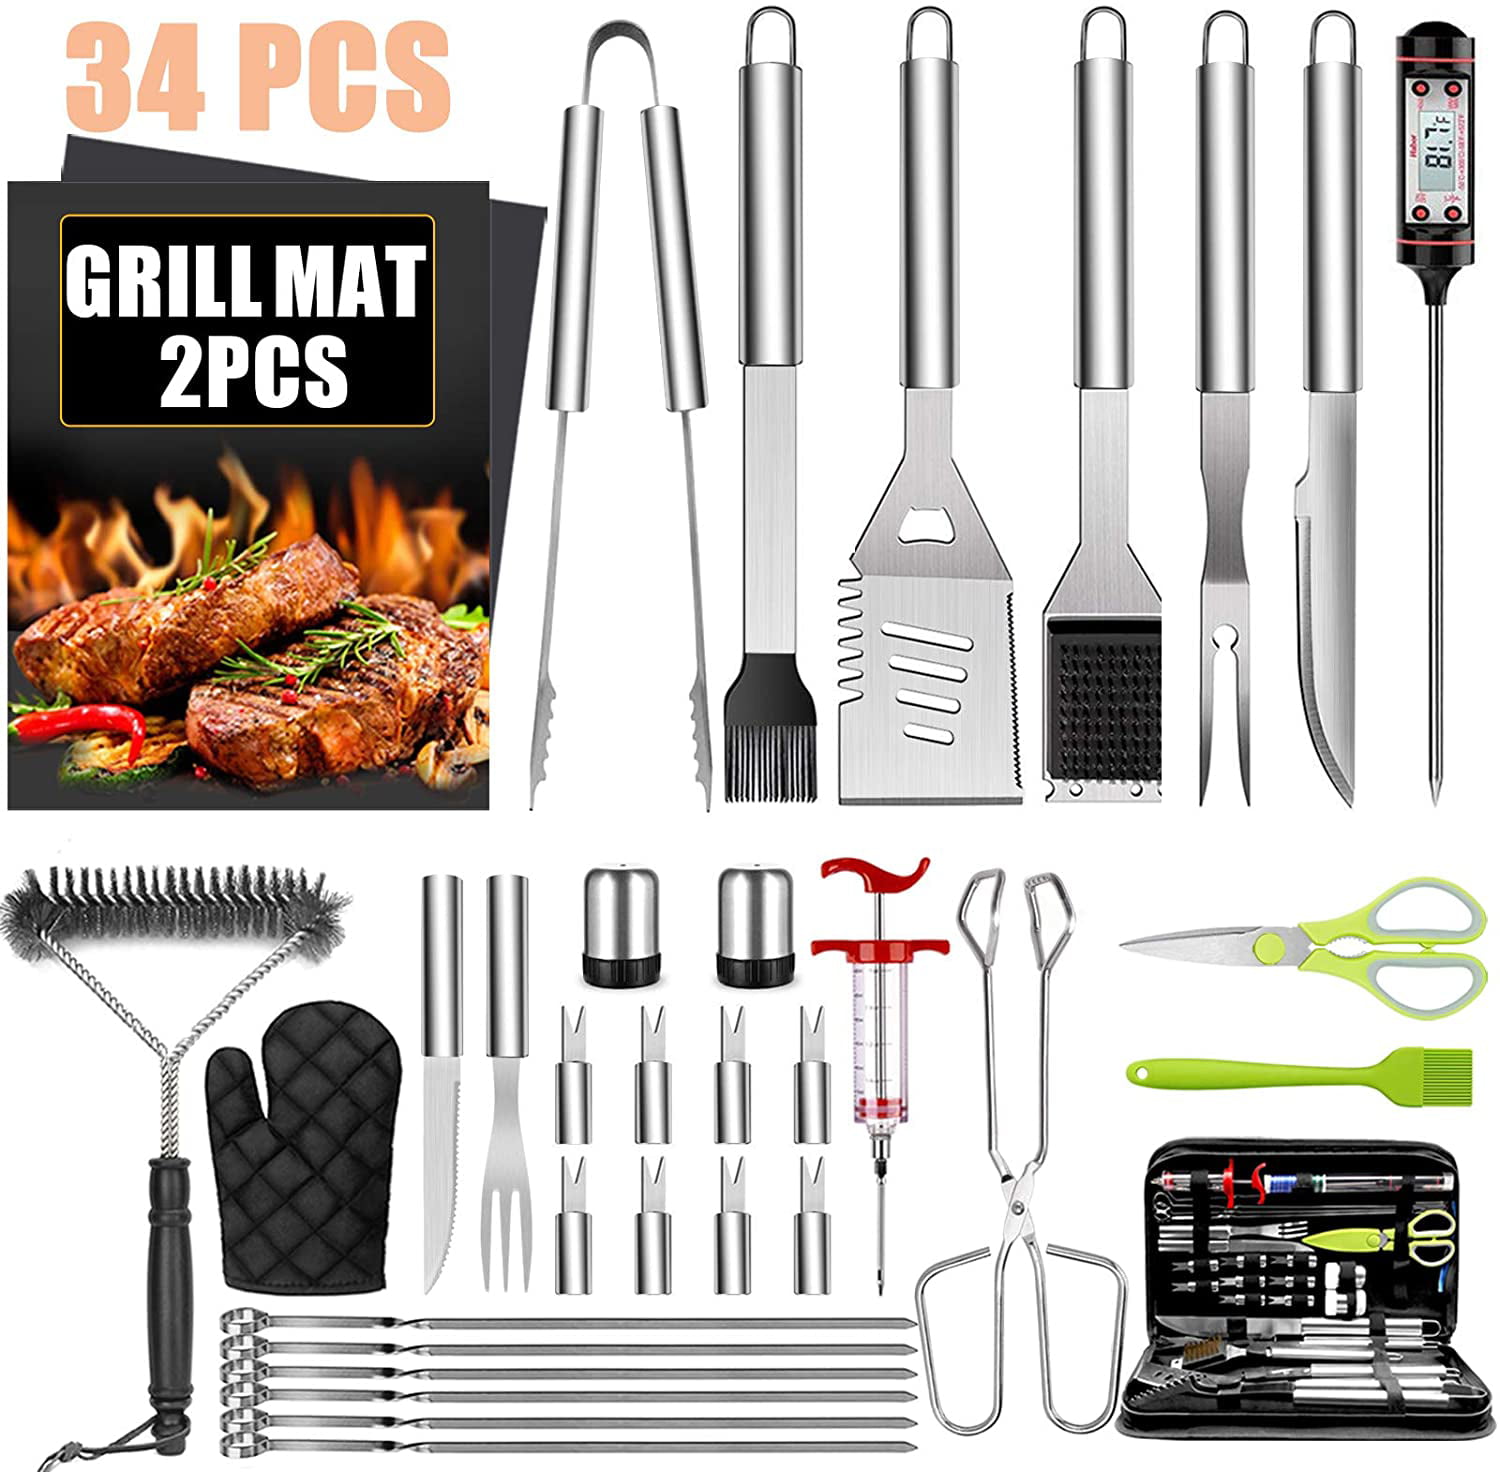 Rusland Normal Koge 34Pcs BBQ Grill Accessories Tools Set, Stainless Steel Grilling Tools with  Carry Bag, Thermometer, Grill Mats for Camping/Backyard Barbecue, Grill  Tools Set for Men Women - Walmart.com